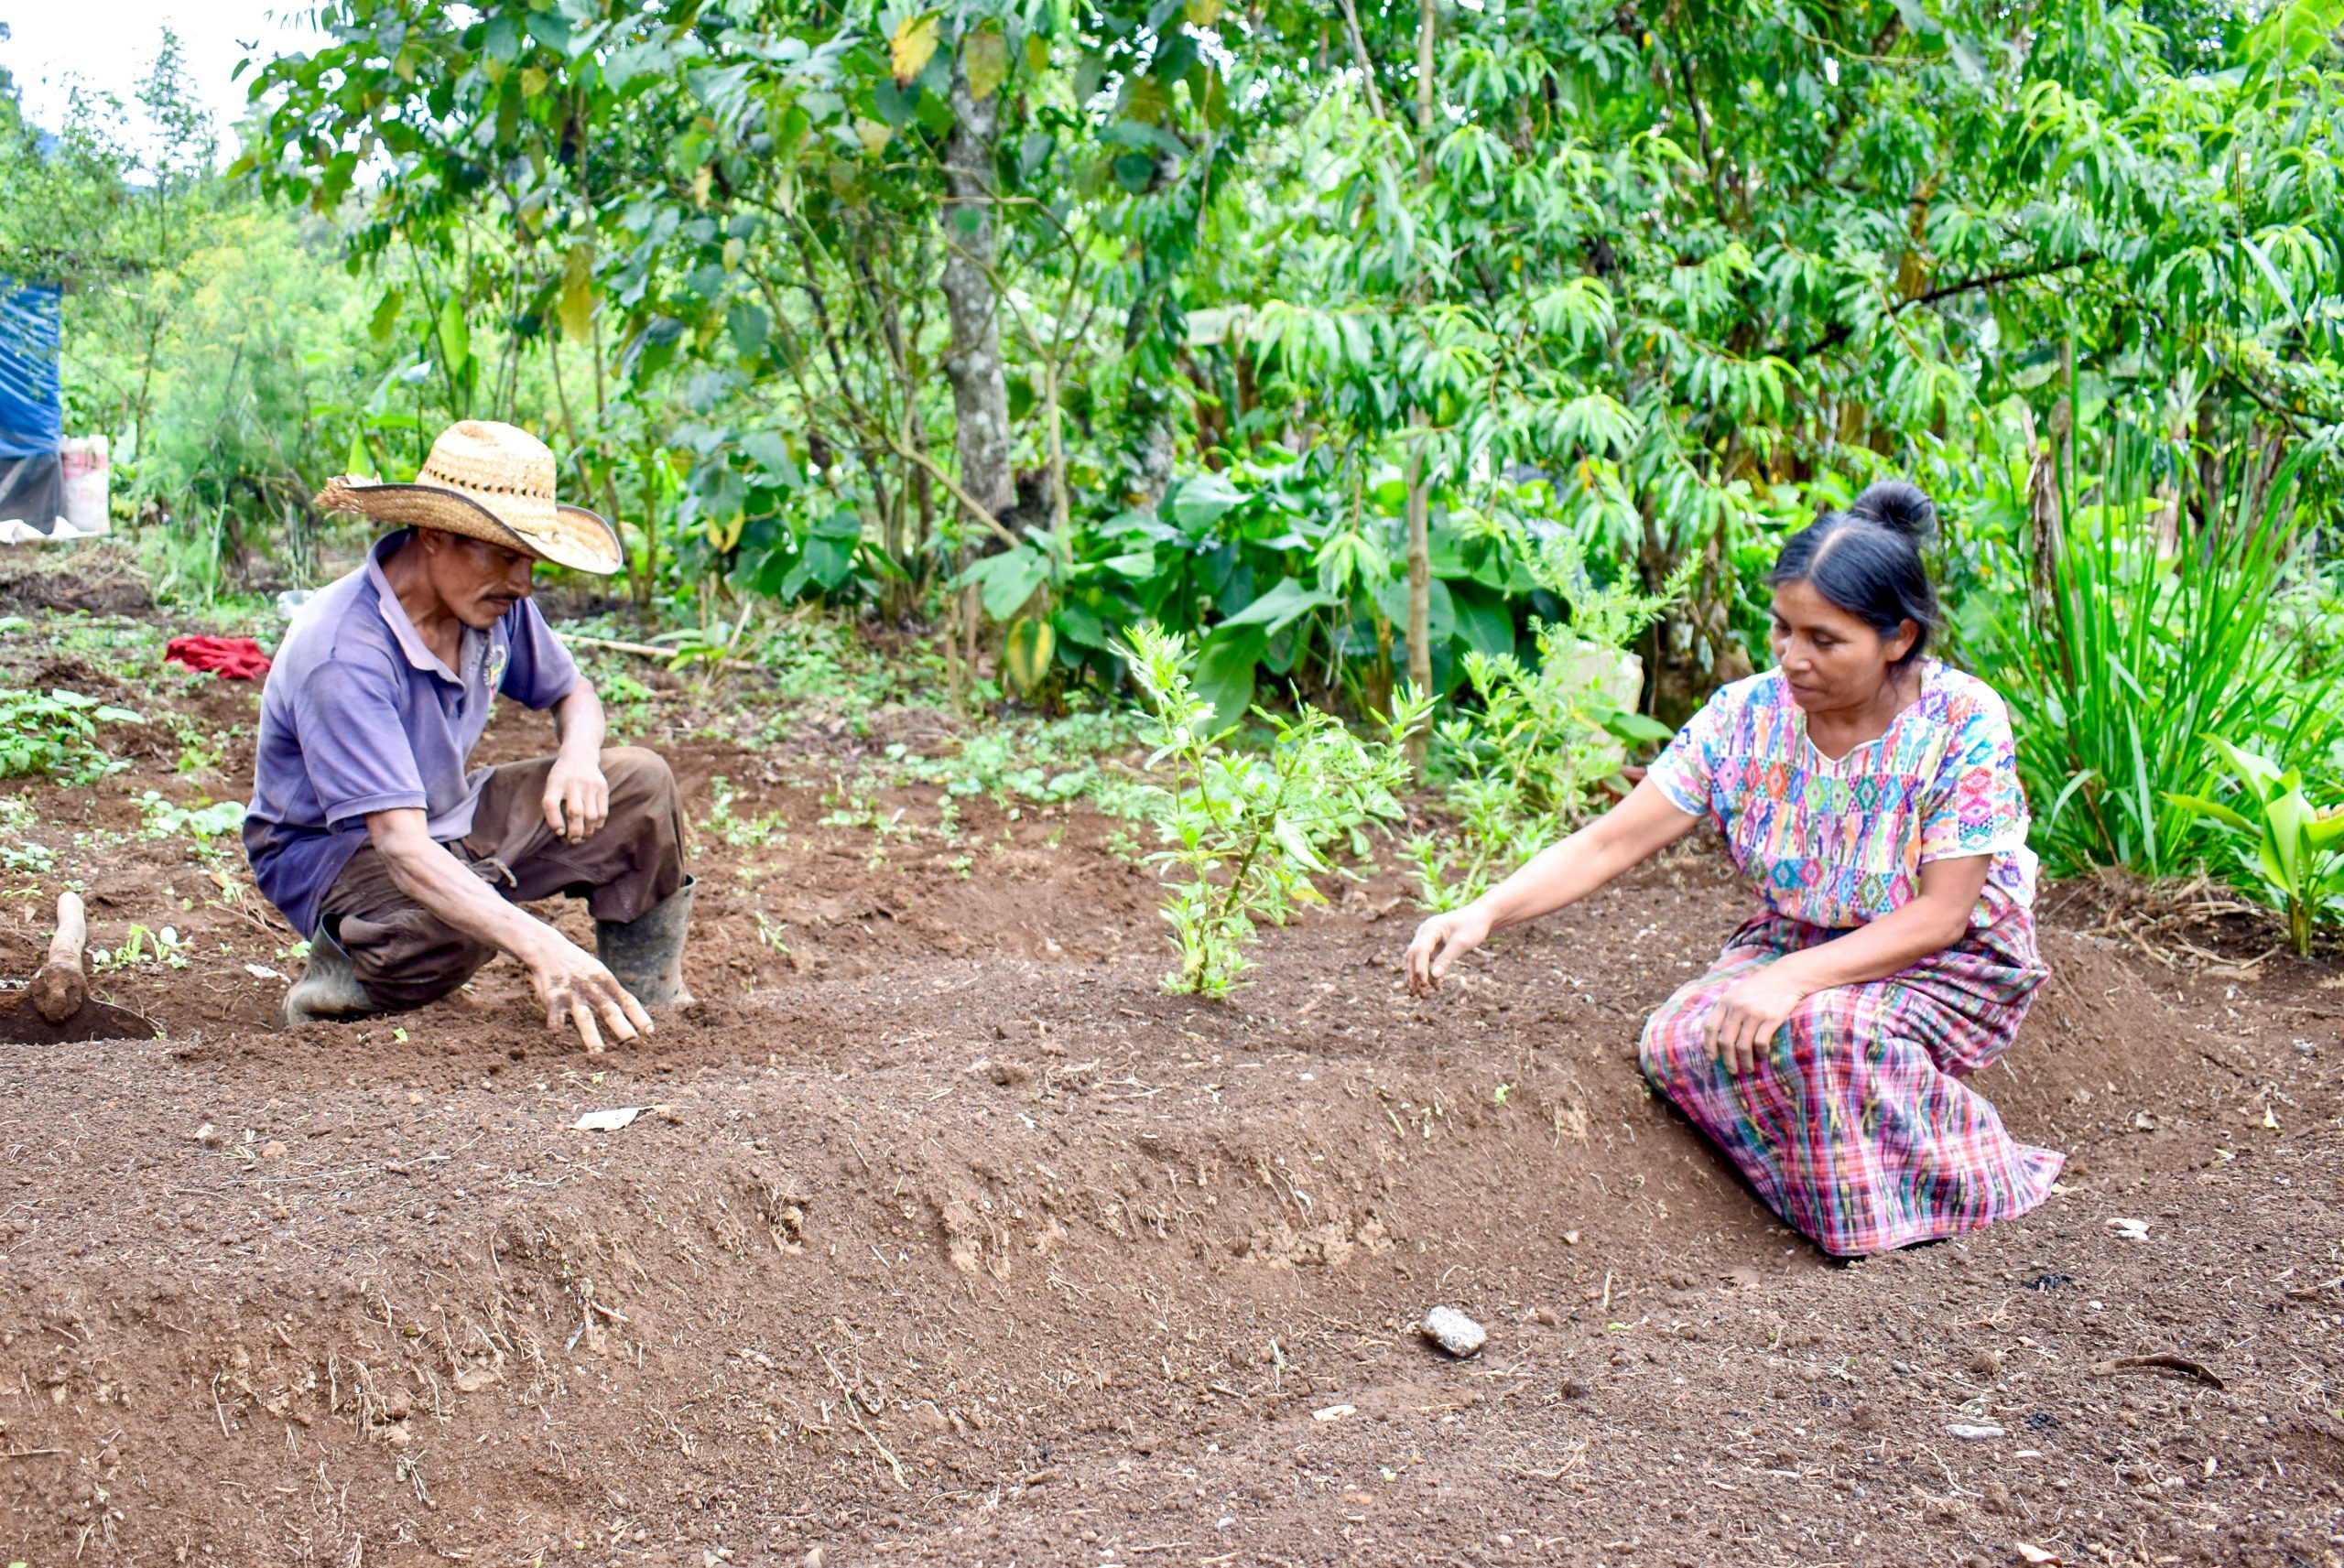 Two members of Maya Ixil cooperative plant new fruit tree saplings alongside other vegetables in their home garden.